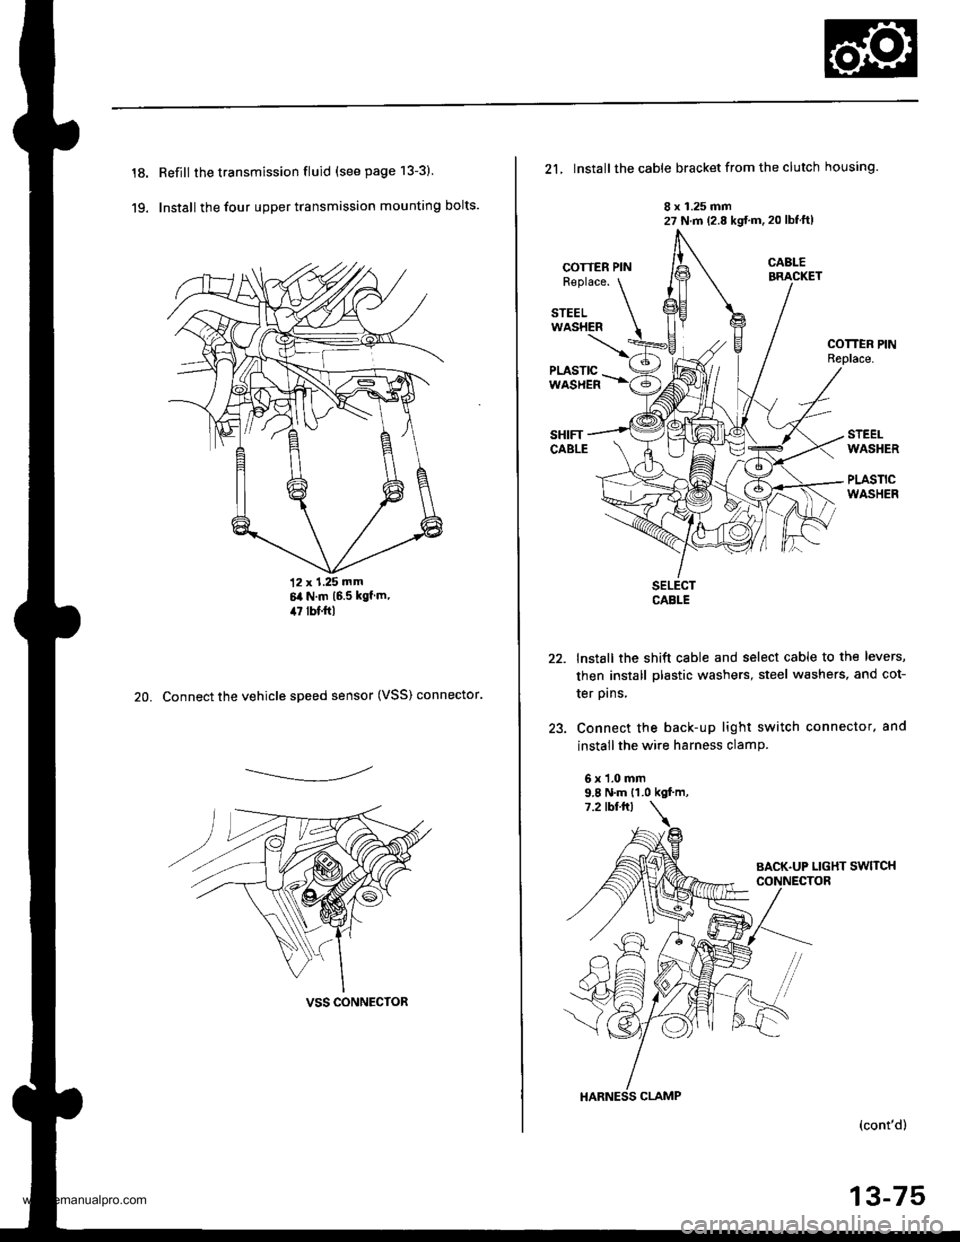 HONDA CR-V 1999 RD1-RD3 / 1.G Workshop Manual 
18.
19.
Refill the transmission fluid (see page 13-3)
Install the four upper transmission mounting bolts.
12 x 1.25 mm6it N.m 16.5 kgf m,il7 lbf.ftl
20. Connect the vehicle speed sensor (VSS) connect